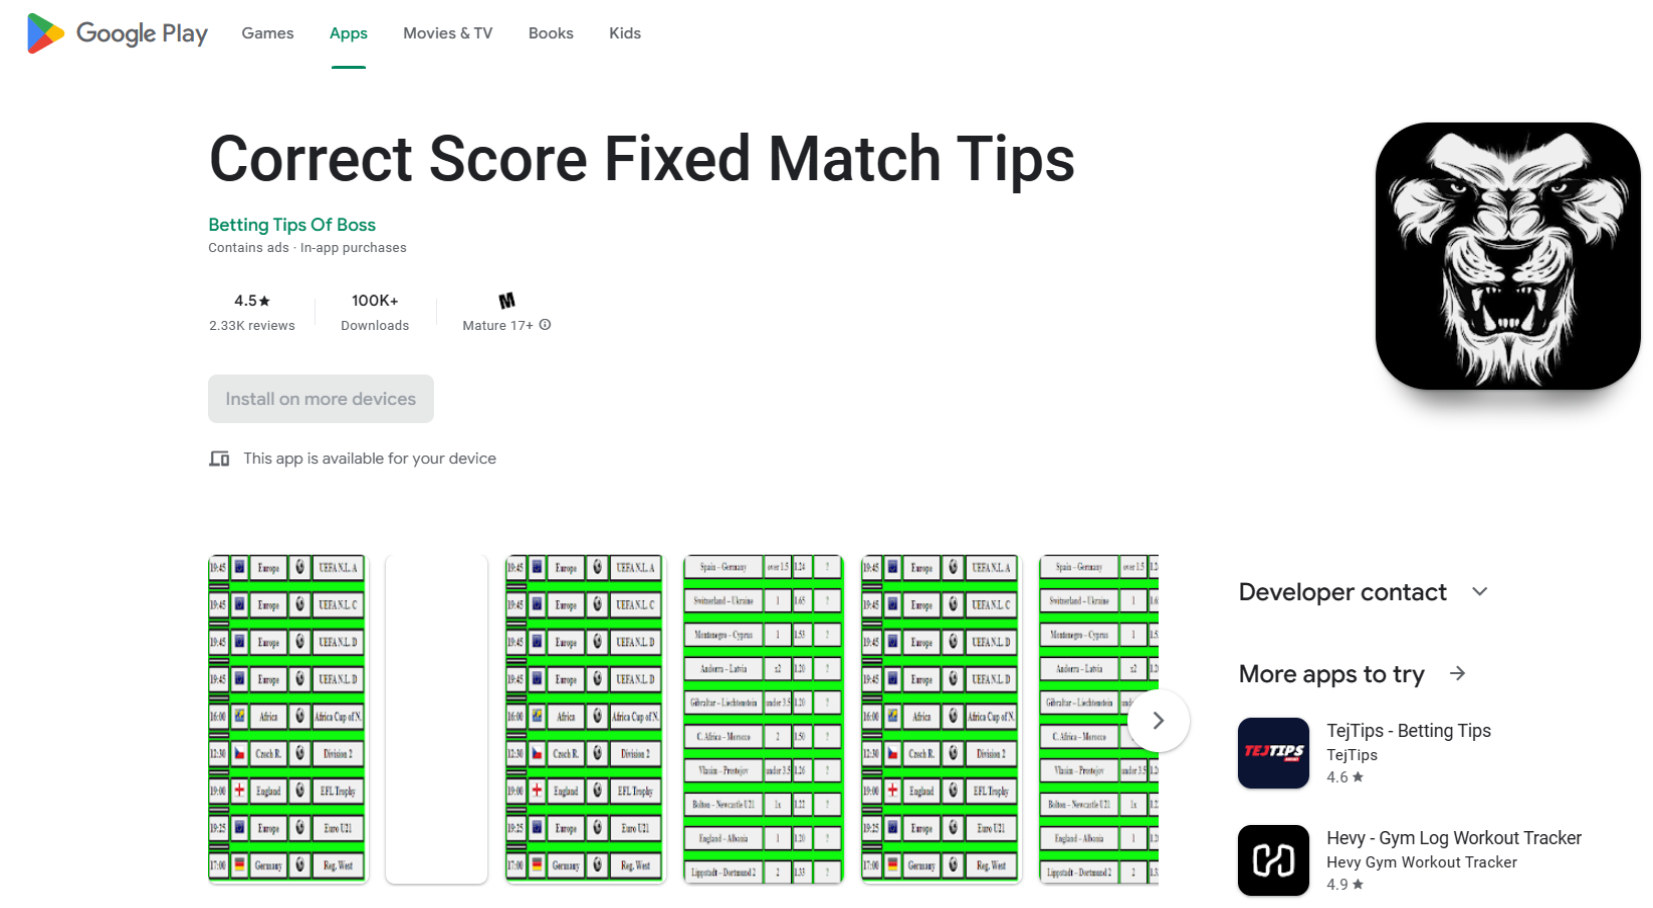 Image of Correct Score Fixed Match Tips app page